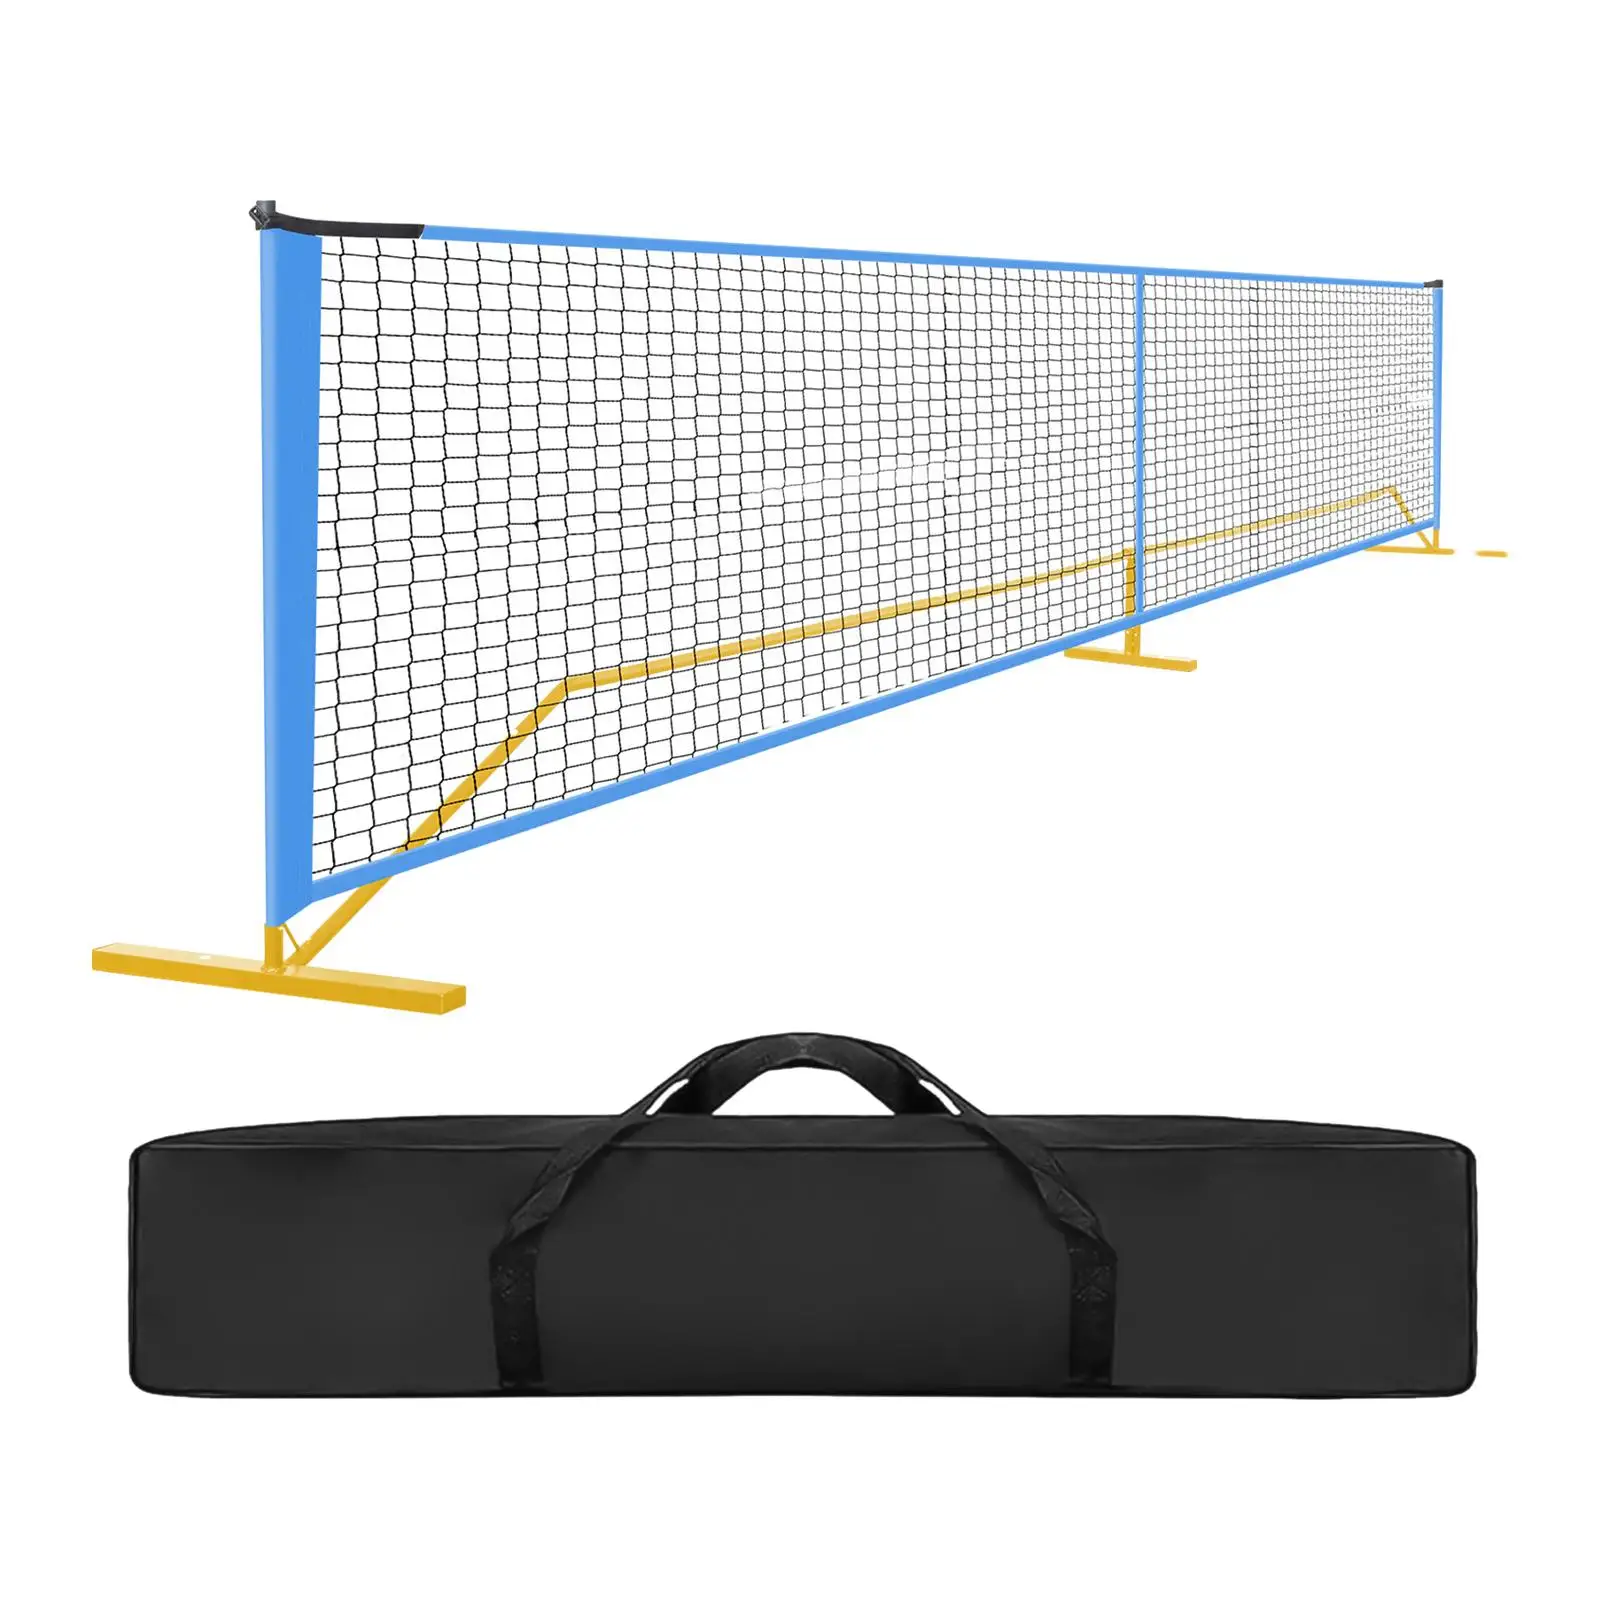 Portable Pickleball Net Set with Metal Frame Stand 22ft Detachable Tennis Net for Tennis Court Driveway Lawn Indoor Outdoor Game